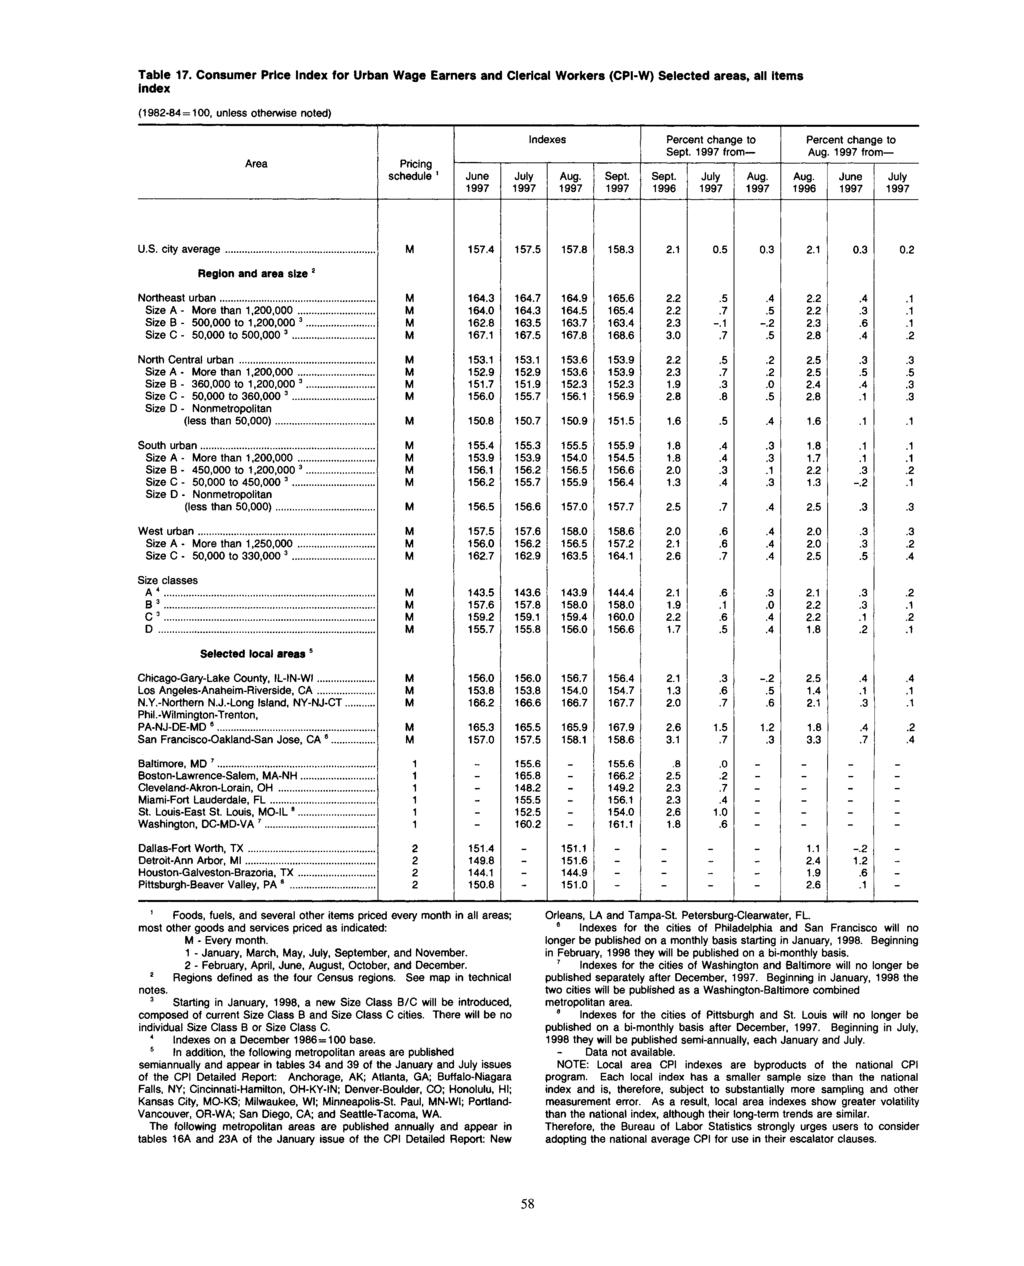 Table 17. Consumer Price for Urban Wage Earners and Clerical Workers (CPI-W) Selected areas, all items index (1982-84=100, unless otherwise noted) Area Pricing schedule 1 June es to to June U.S. city average.